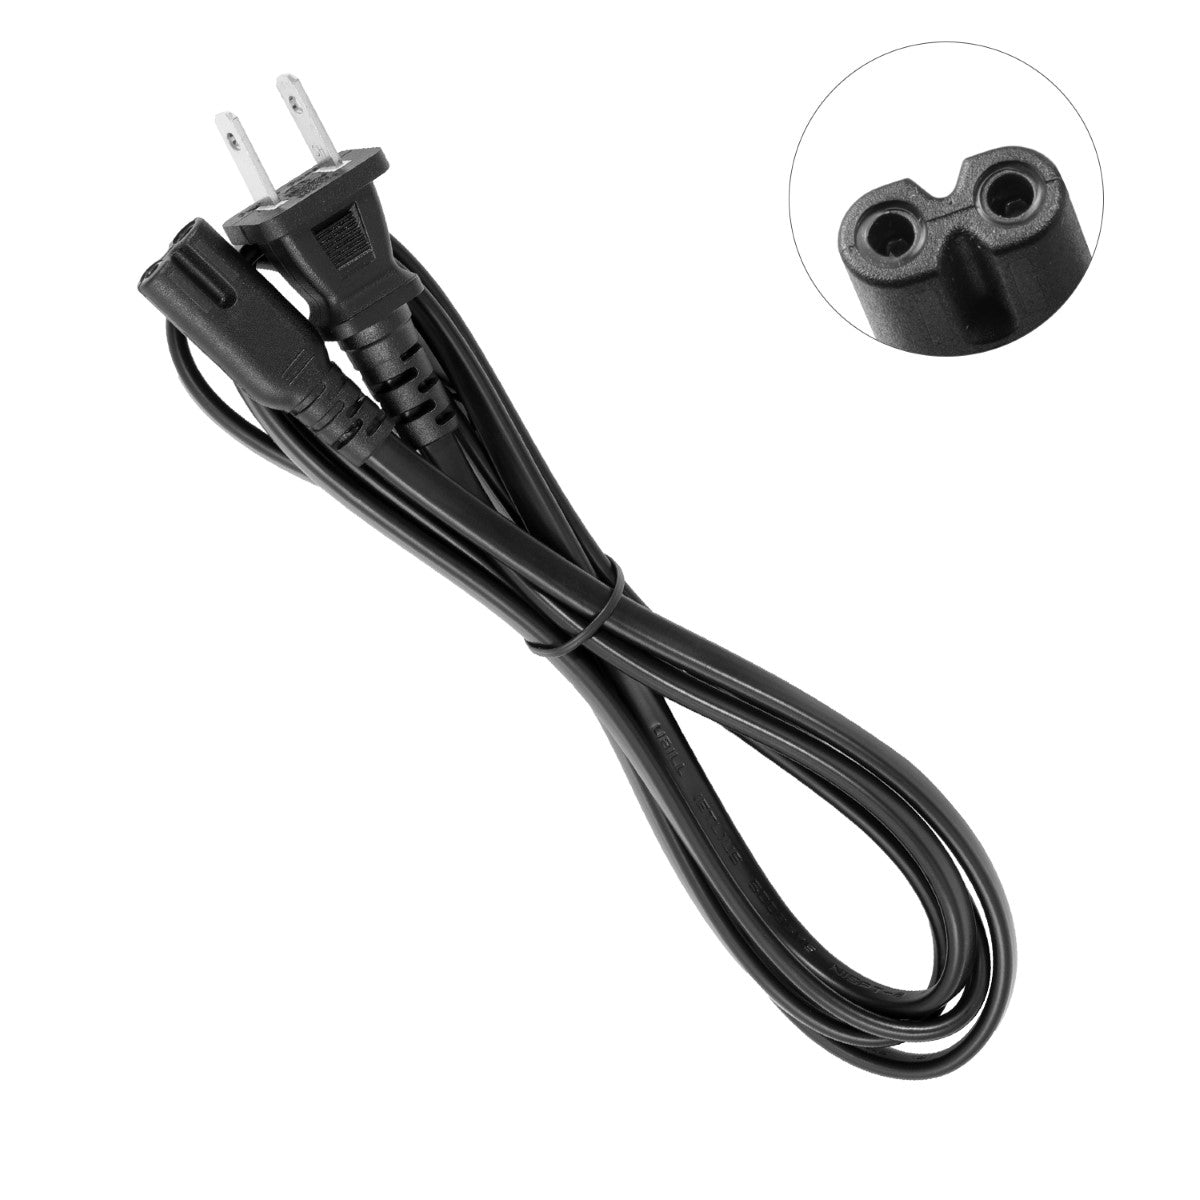 Power Cord for Sony PlayStation 3 Slim.